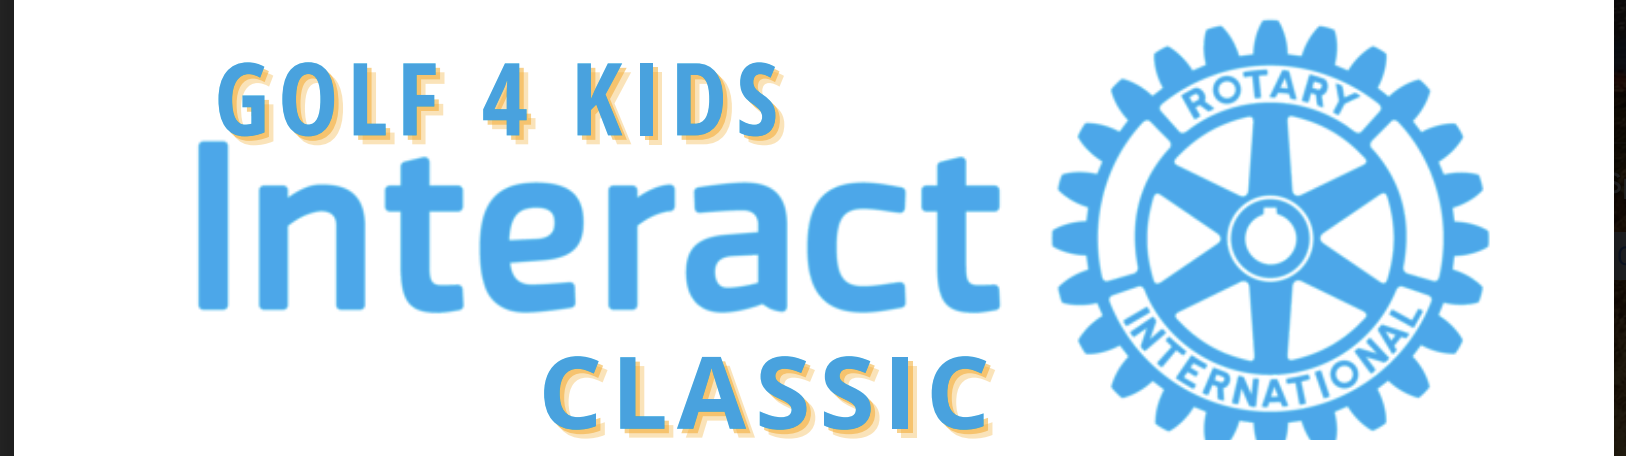 Golf 4 Kids Interact Classic 2022 | Rotary Club Memphis Central